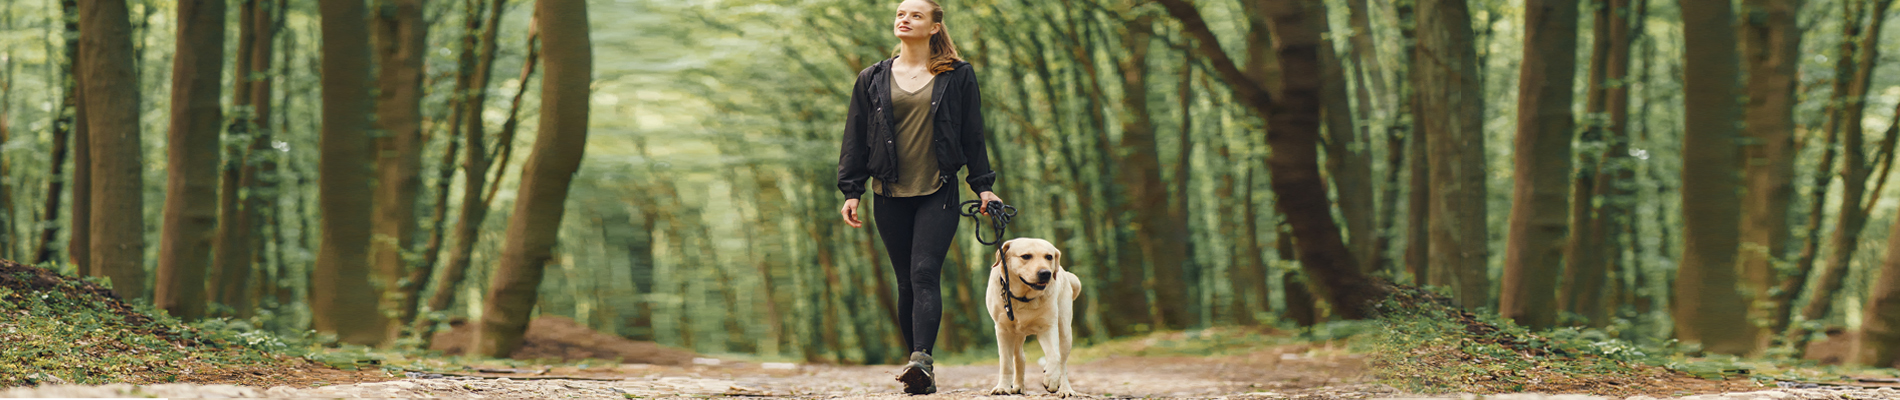 Woman walking her dog on a wooded trail